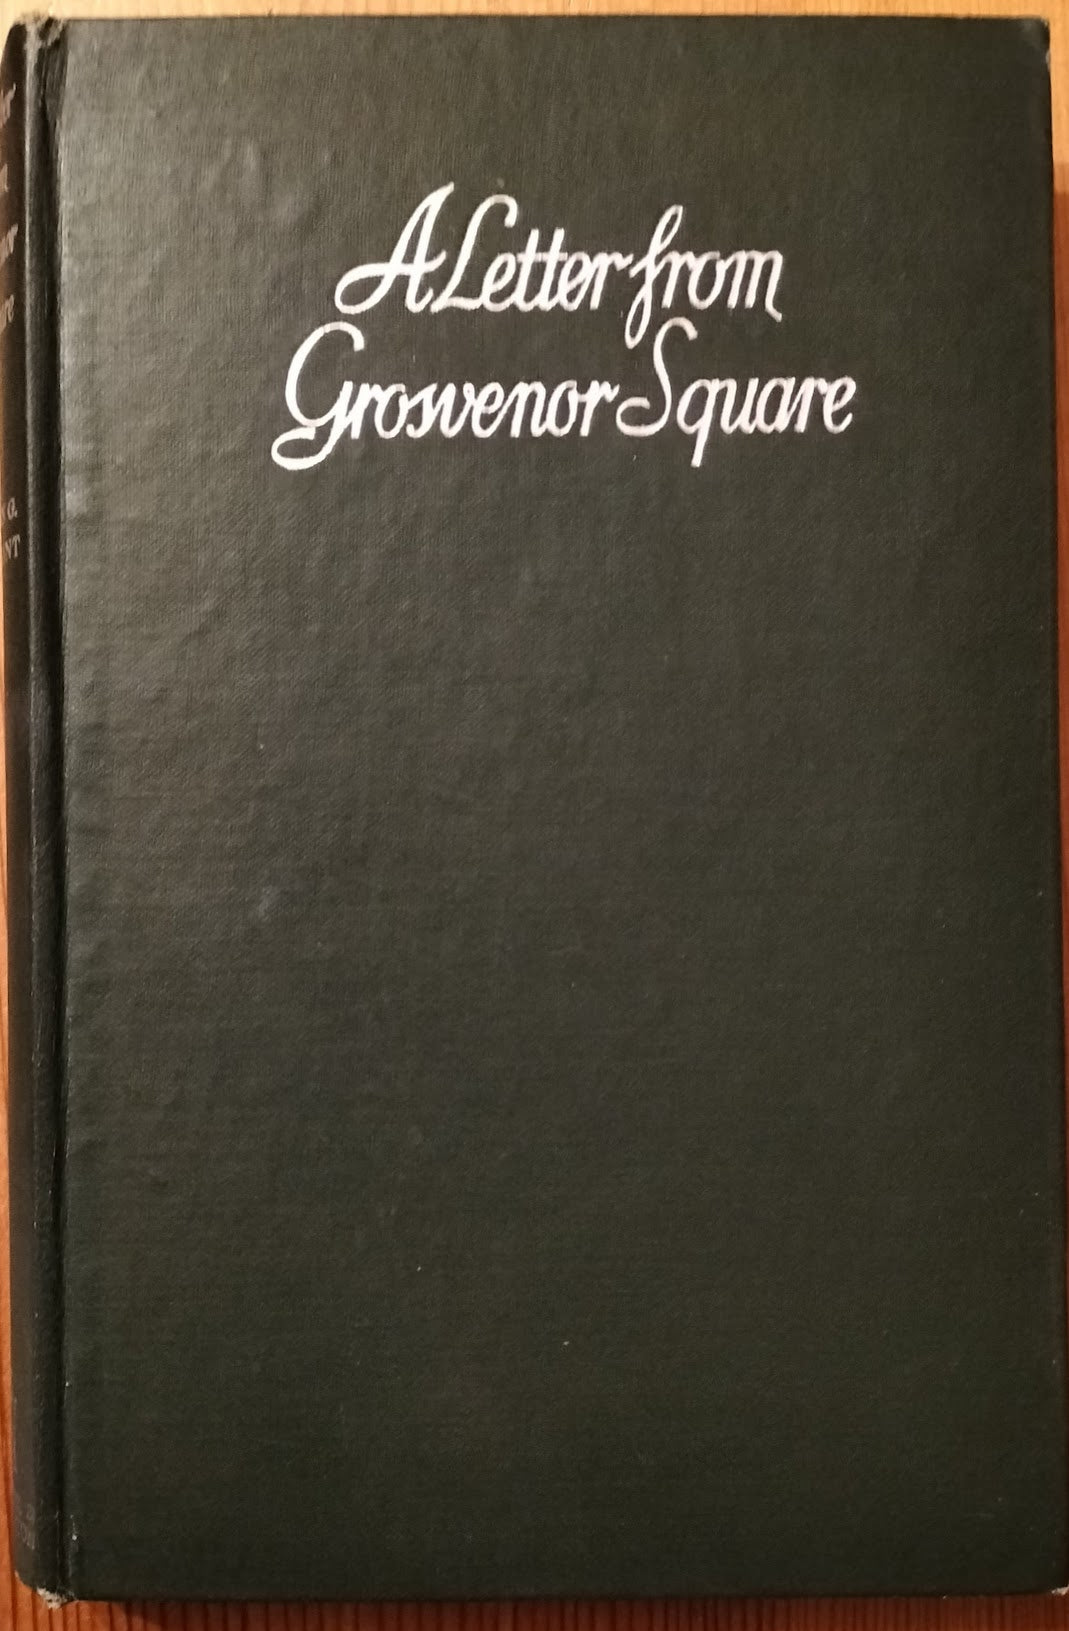 A Letter from Grosvenor Square by John G. Winant.